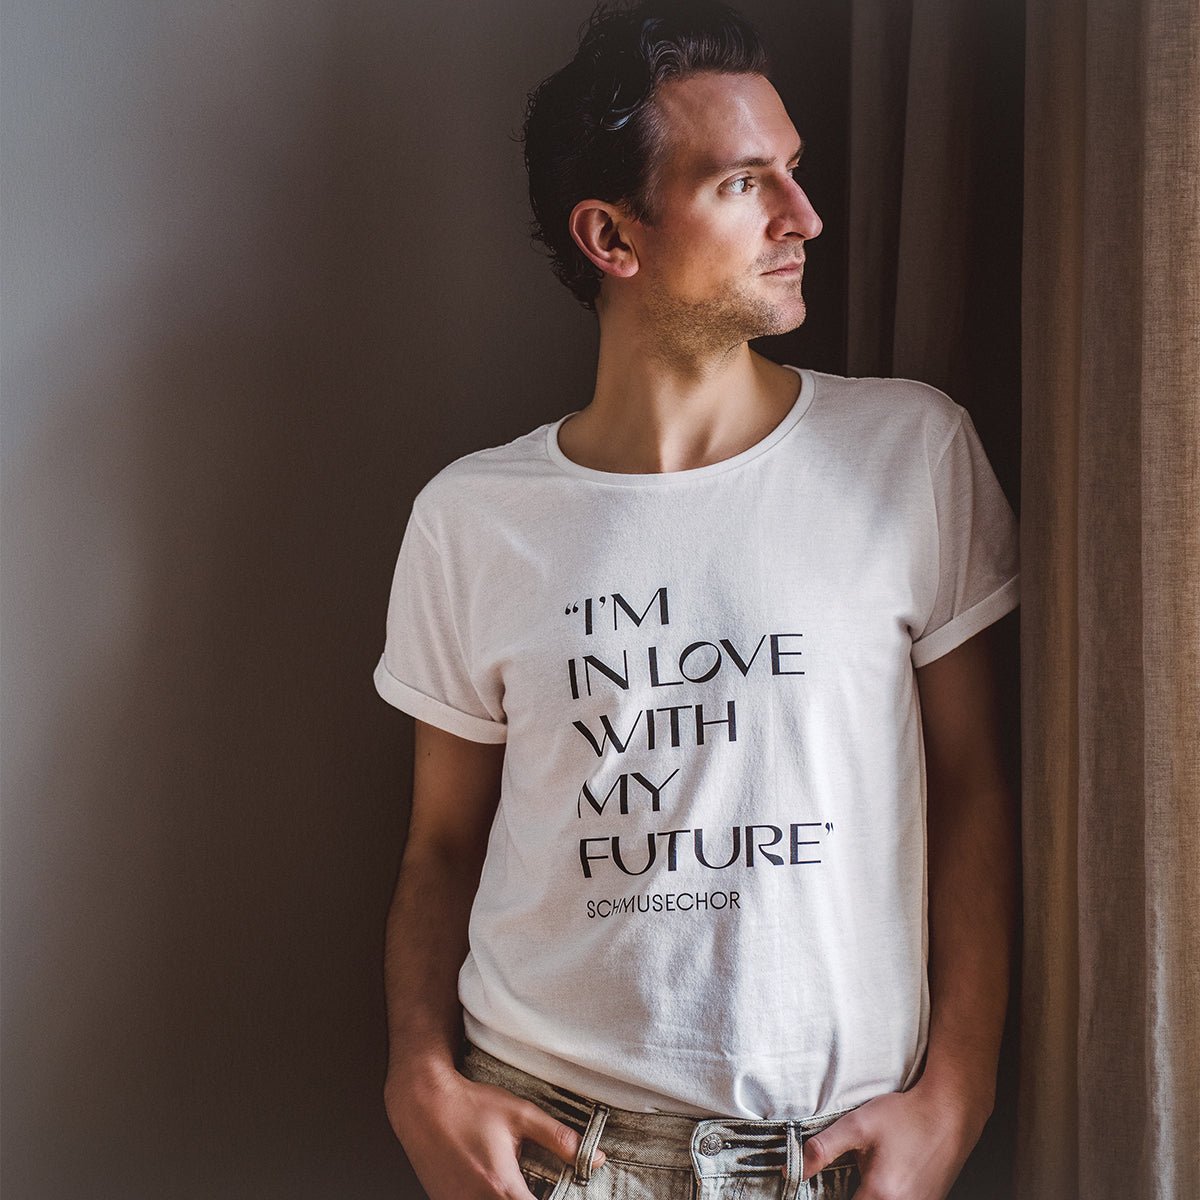 T-Shirt „I’M IN LOVE WITH MY FUTURE“ Schmusechor – diesellerie.com